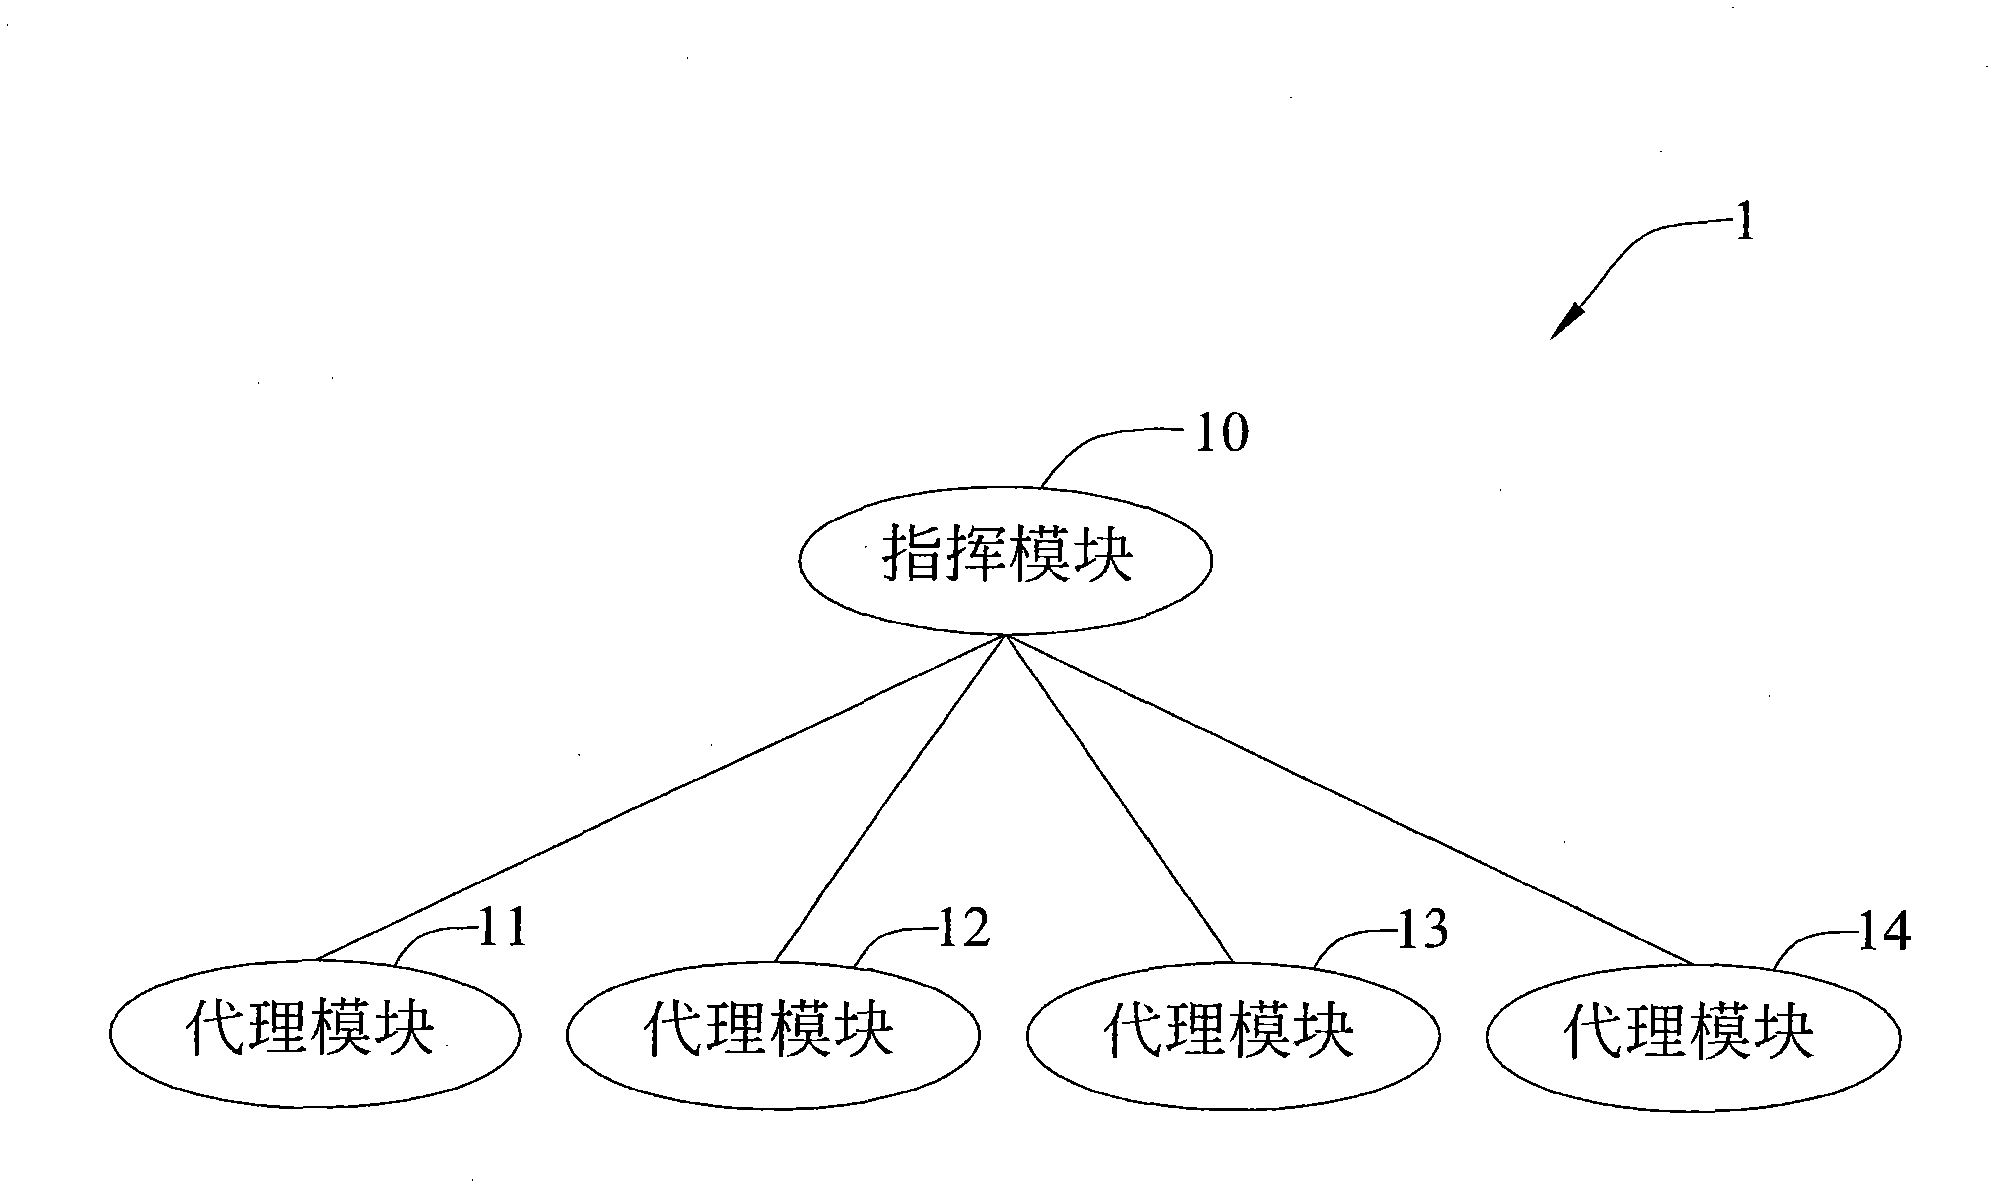 Distributed arithmetic system applied to video monitoring platform